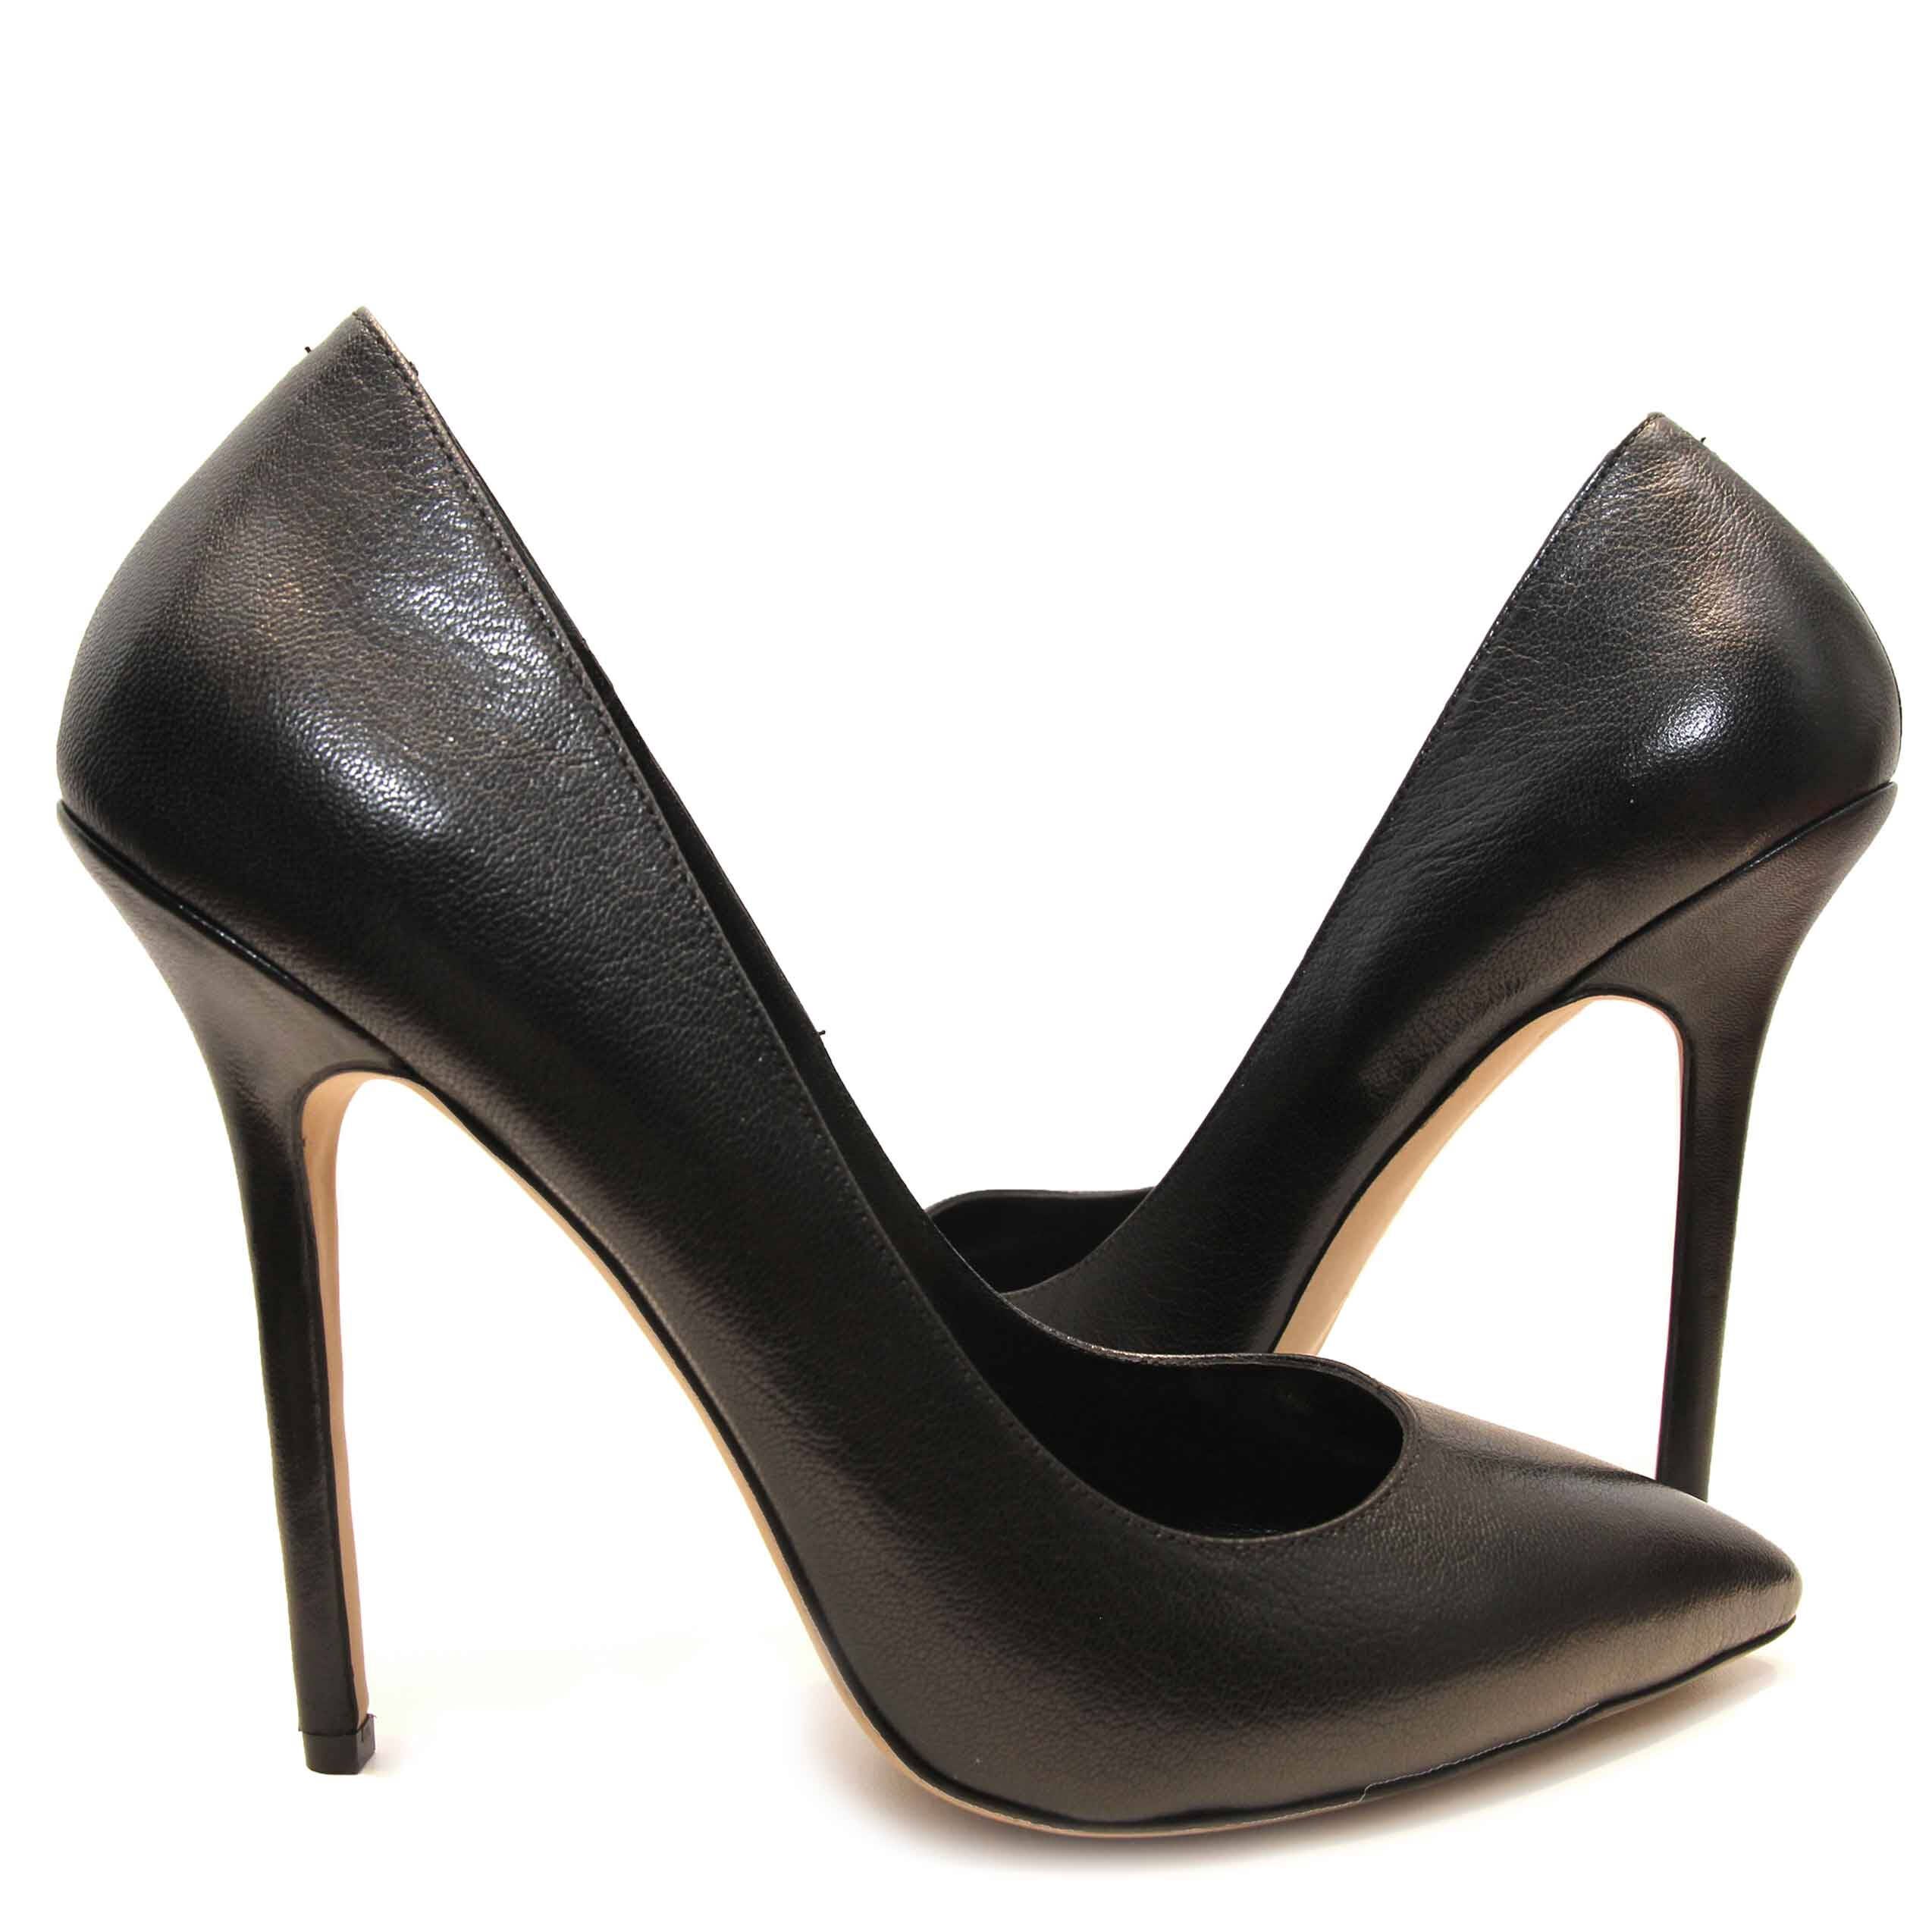 Edza Audrey Black Leather Pointed Toe High Heel Pumps 